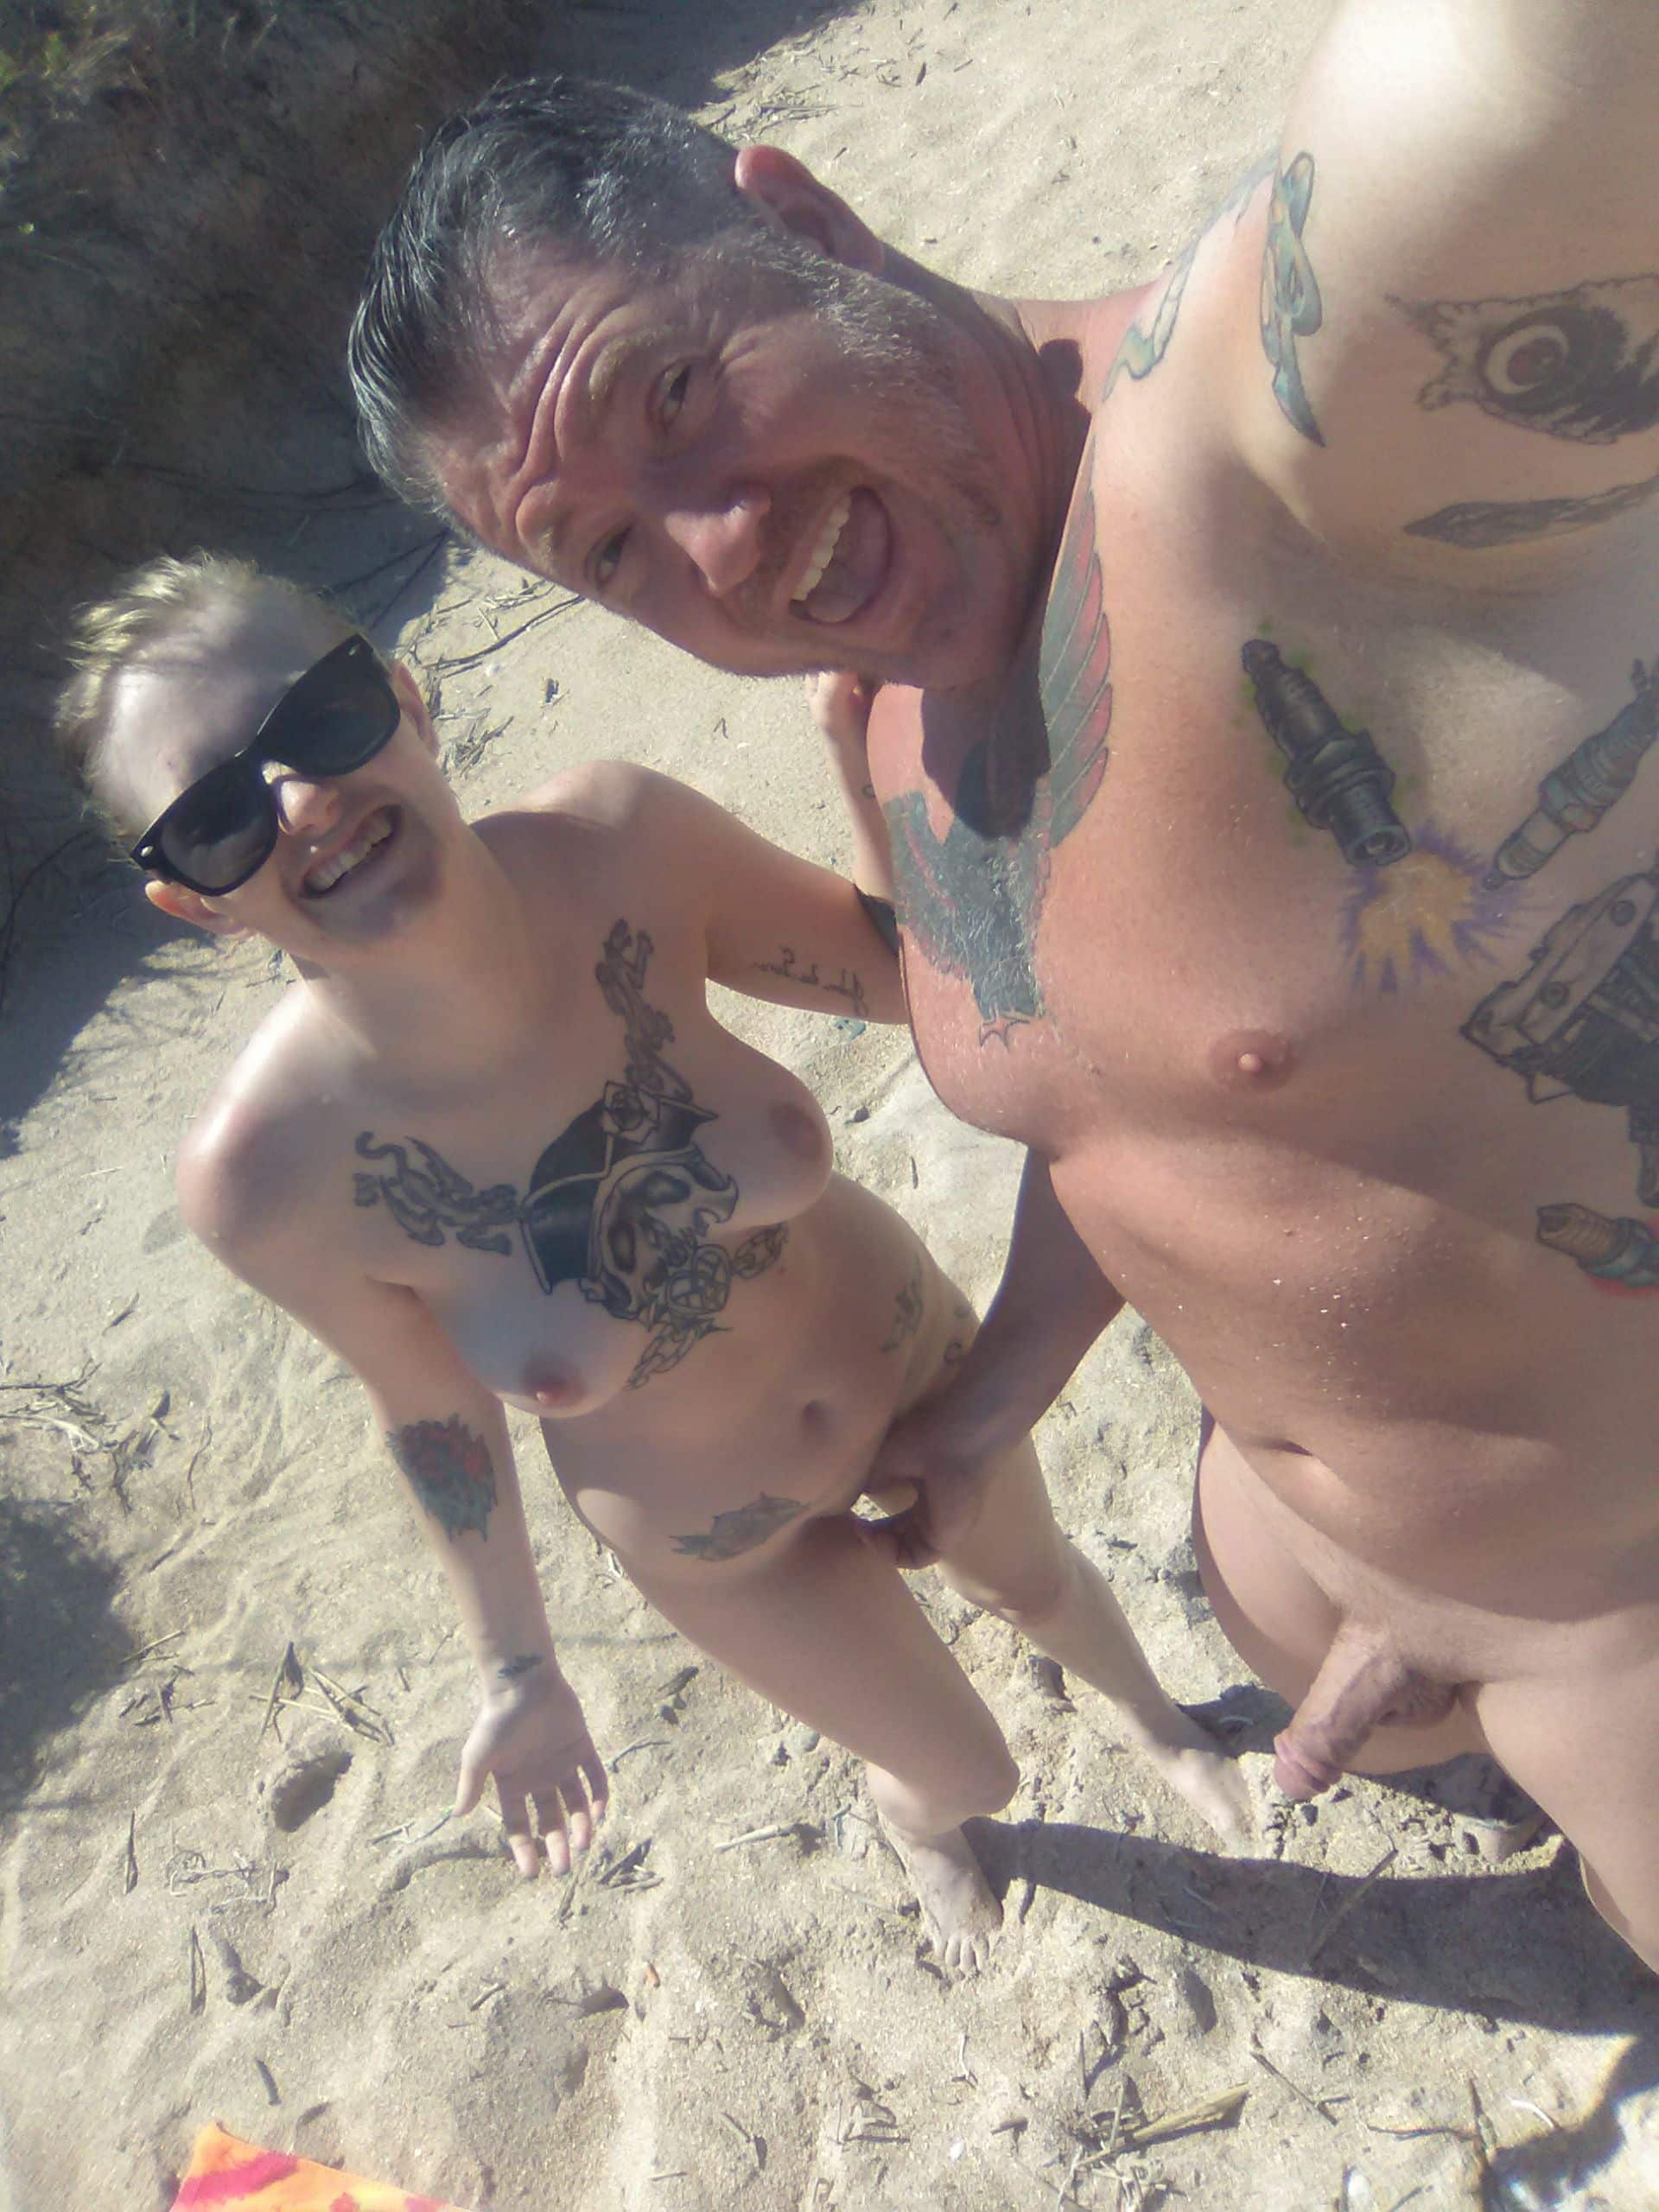 Tattooed exhibionist couple Outdoor selfie Nude Beach Pics, Public Nudity Pics, Real Amateurs from Google, Tumblr, Pinterest, Facebook, Twitter, Instagram and Snapchat. image